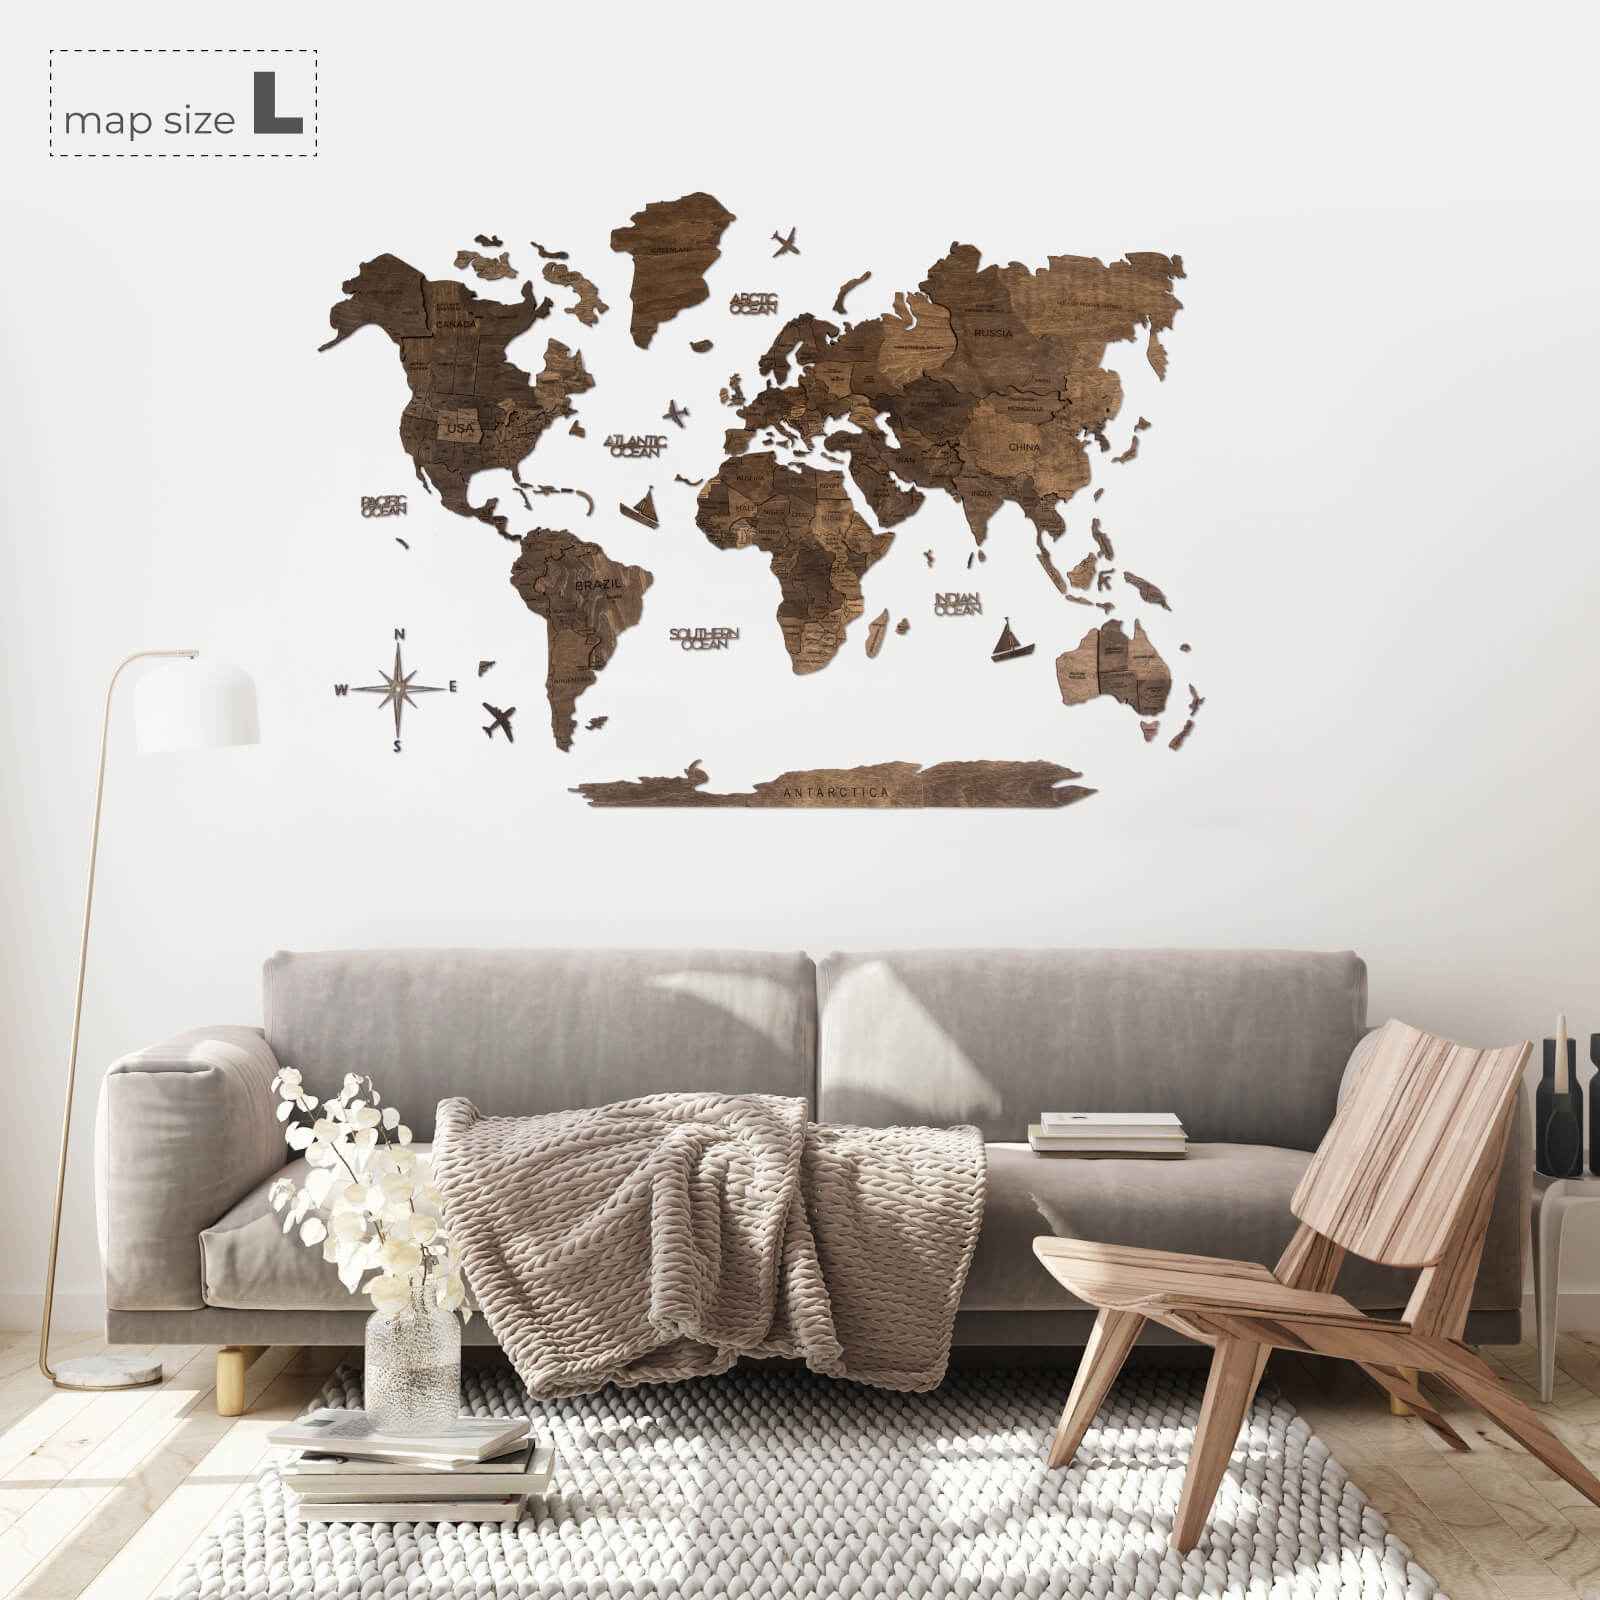 Wooden World Map, Wood Map, Wall Art Decor, Map of the World, 3D World Map,  Large Map for Wall, One Colour Wood Map